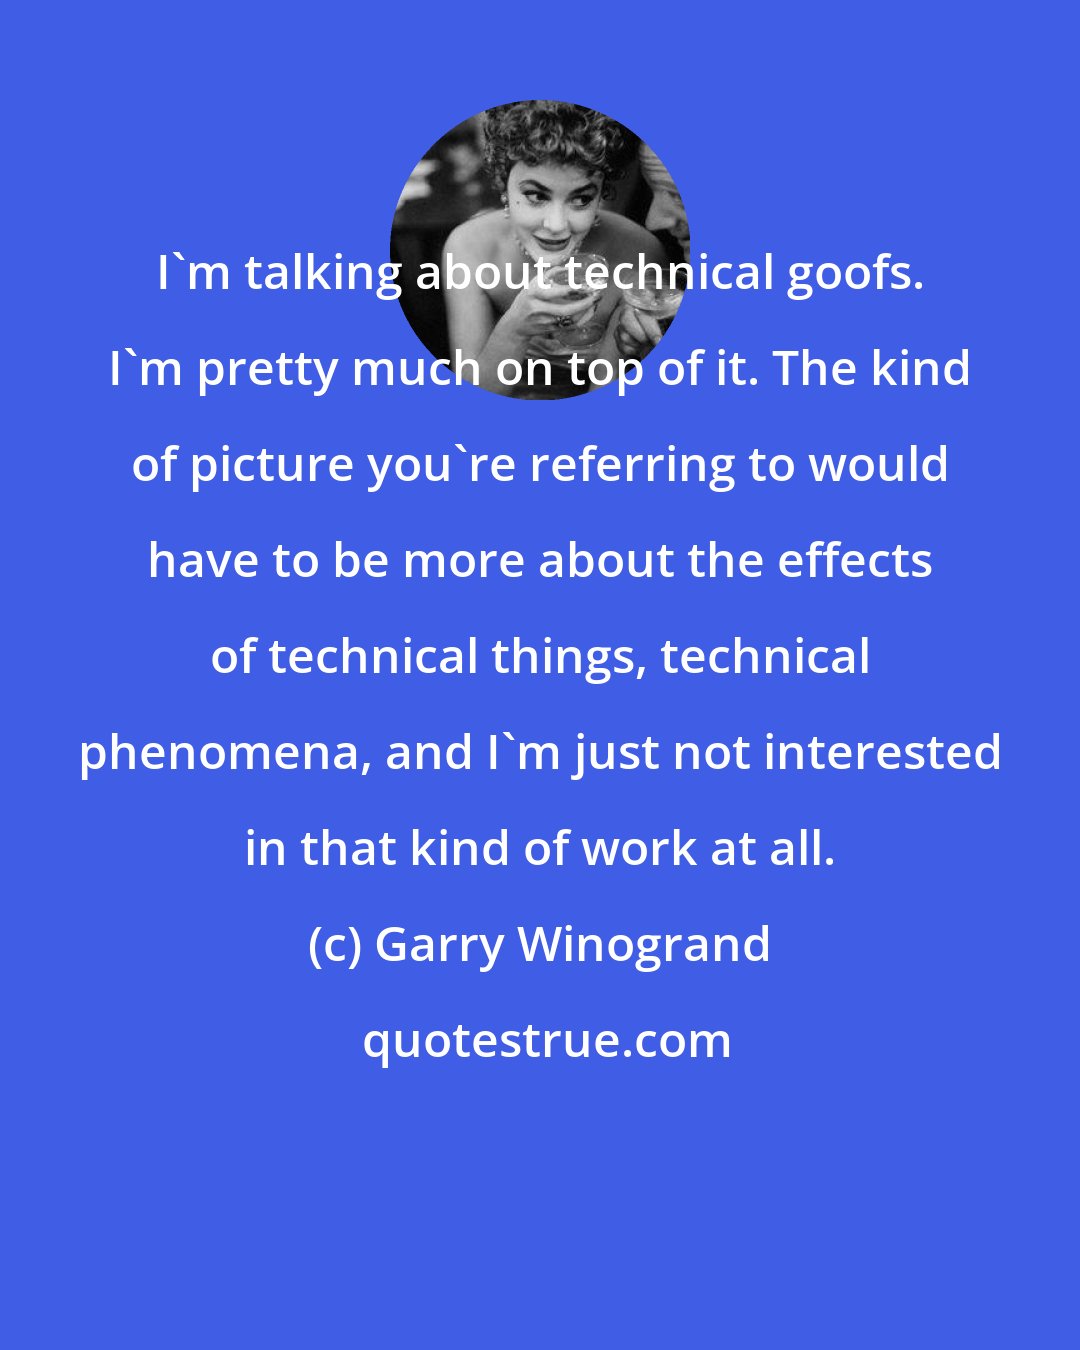 Garry Winogrand: I'm talking about technical goofs. I'm pretty much on top of it. The kind of picture you're referring to would have to be more about the effects of technical things, technical phenomena, and I'm just not interested in that kind of work at all.